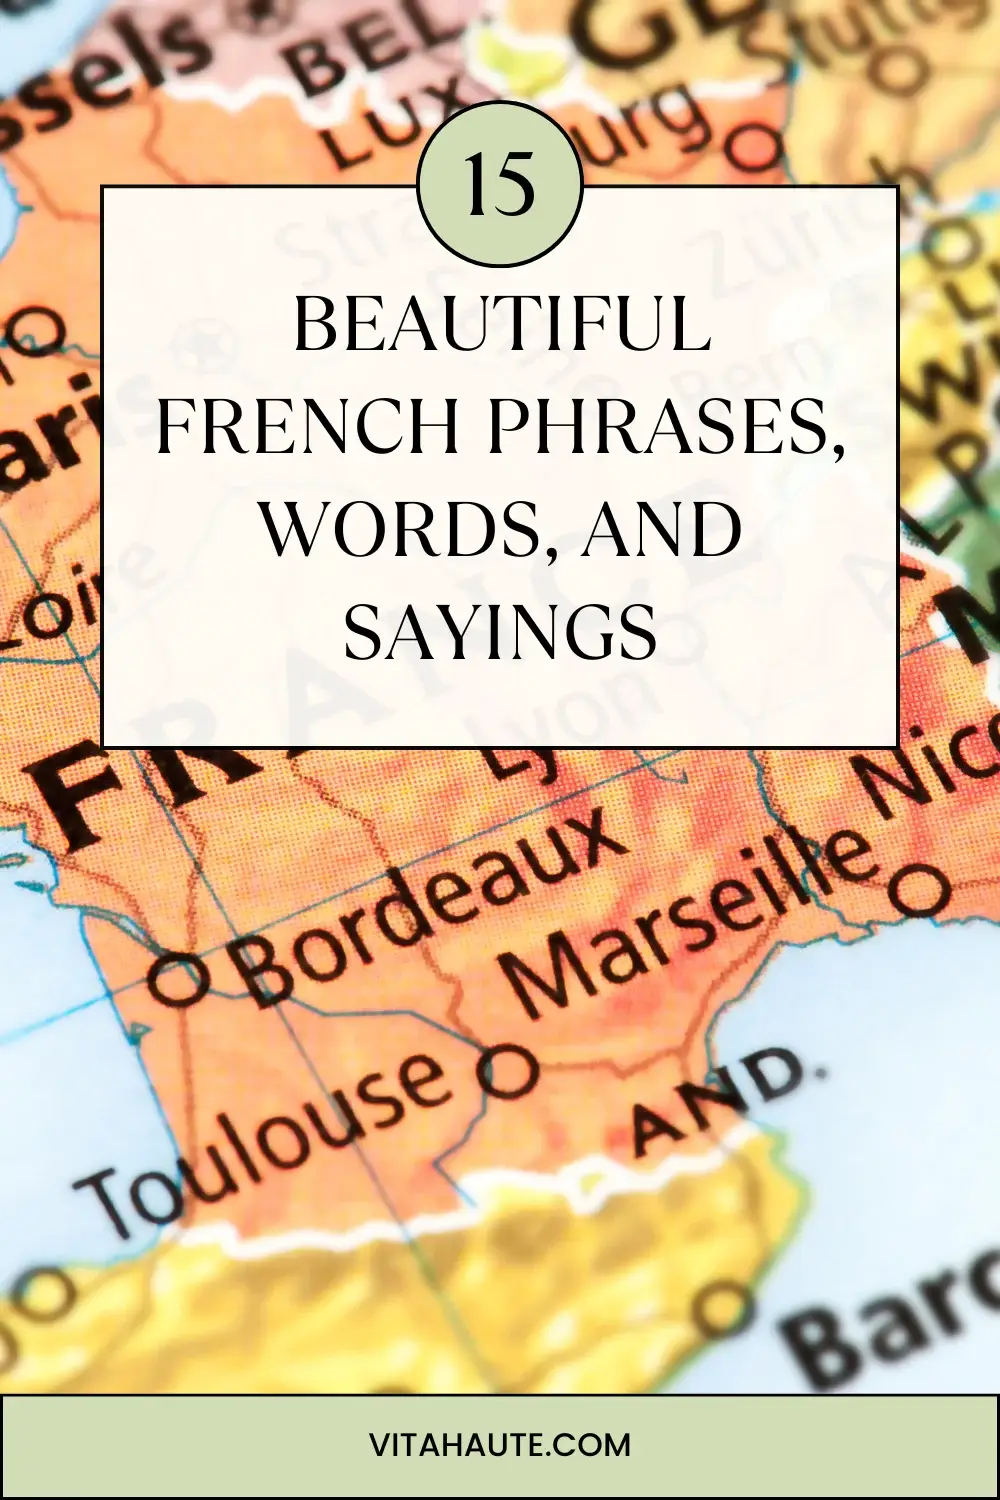 A list of beautiful words, sayings, and phrases in French